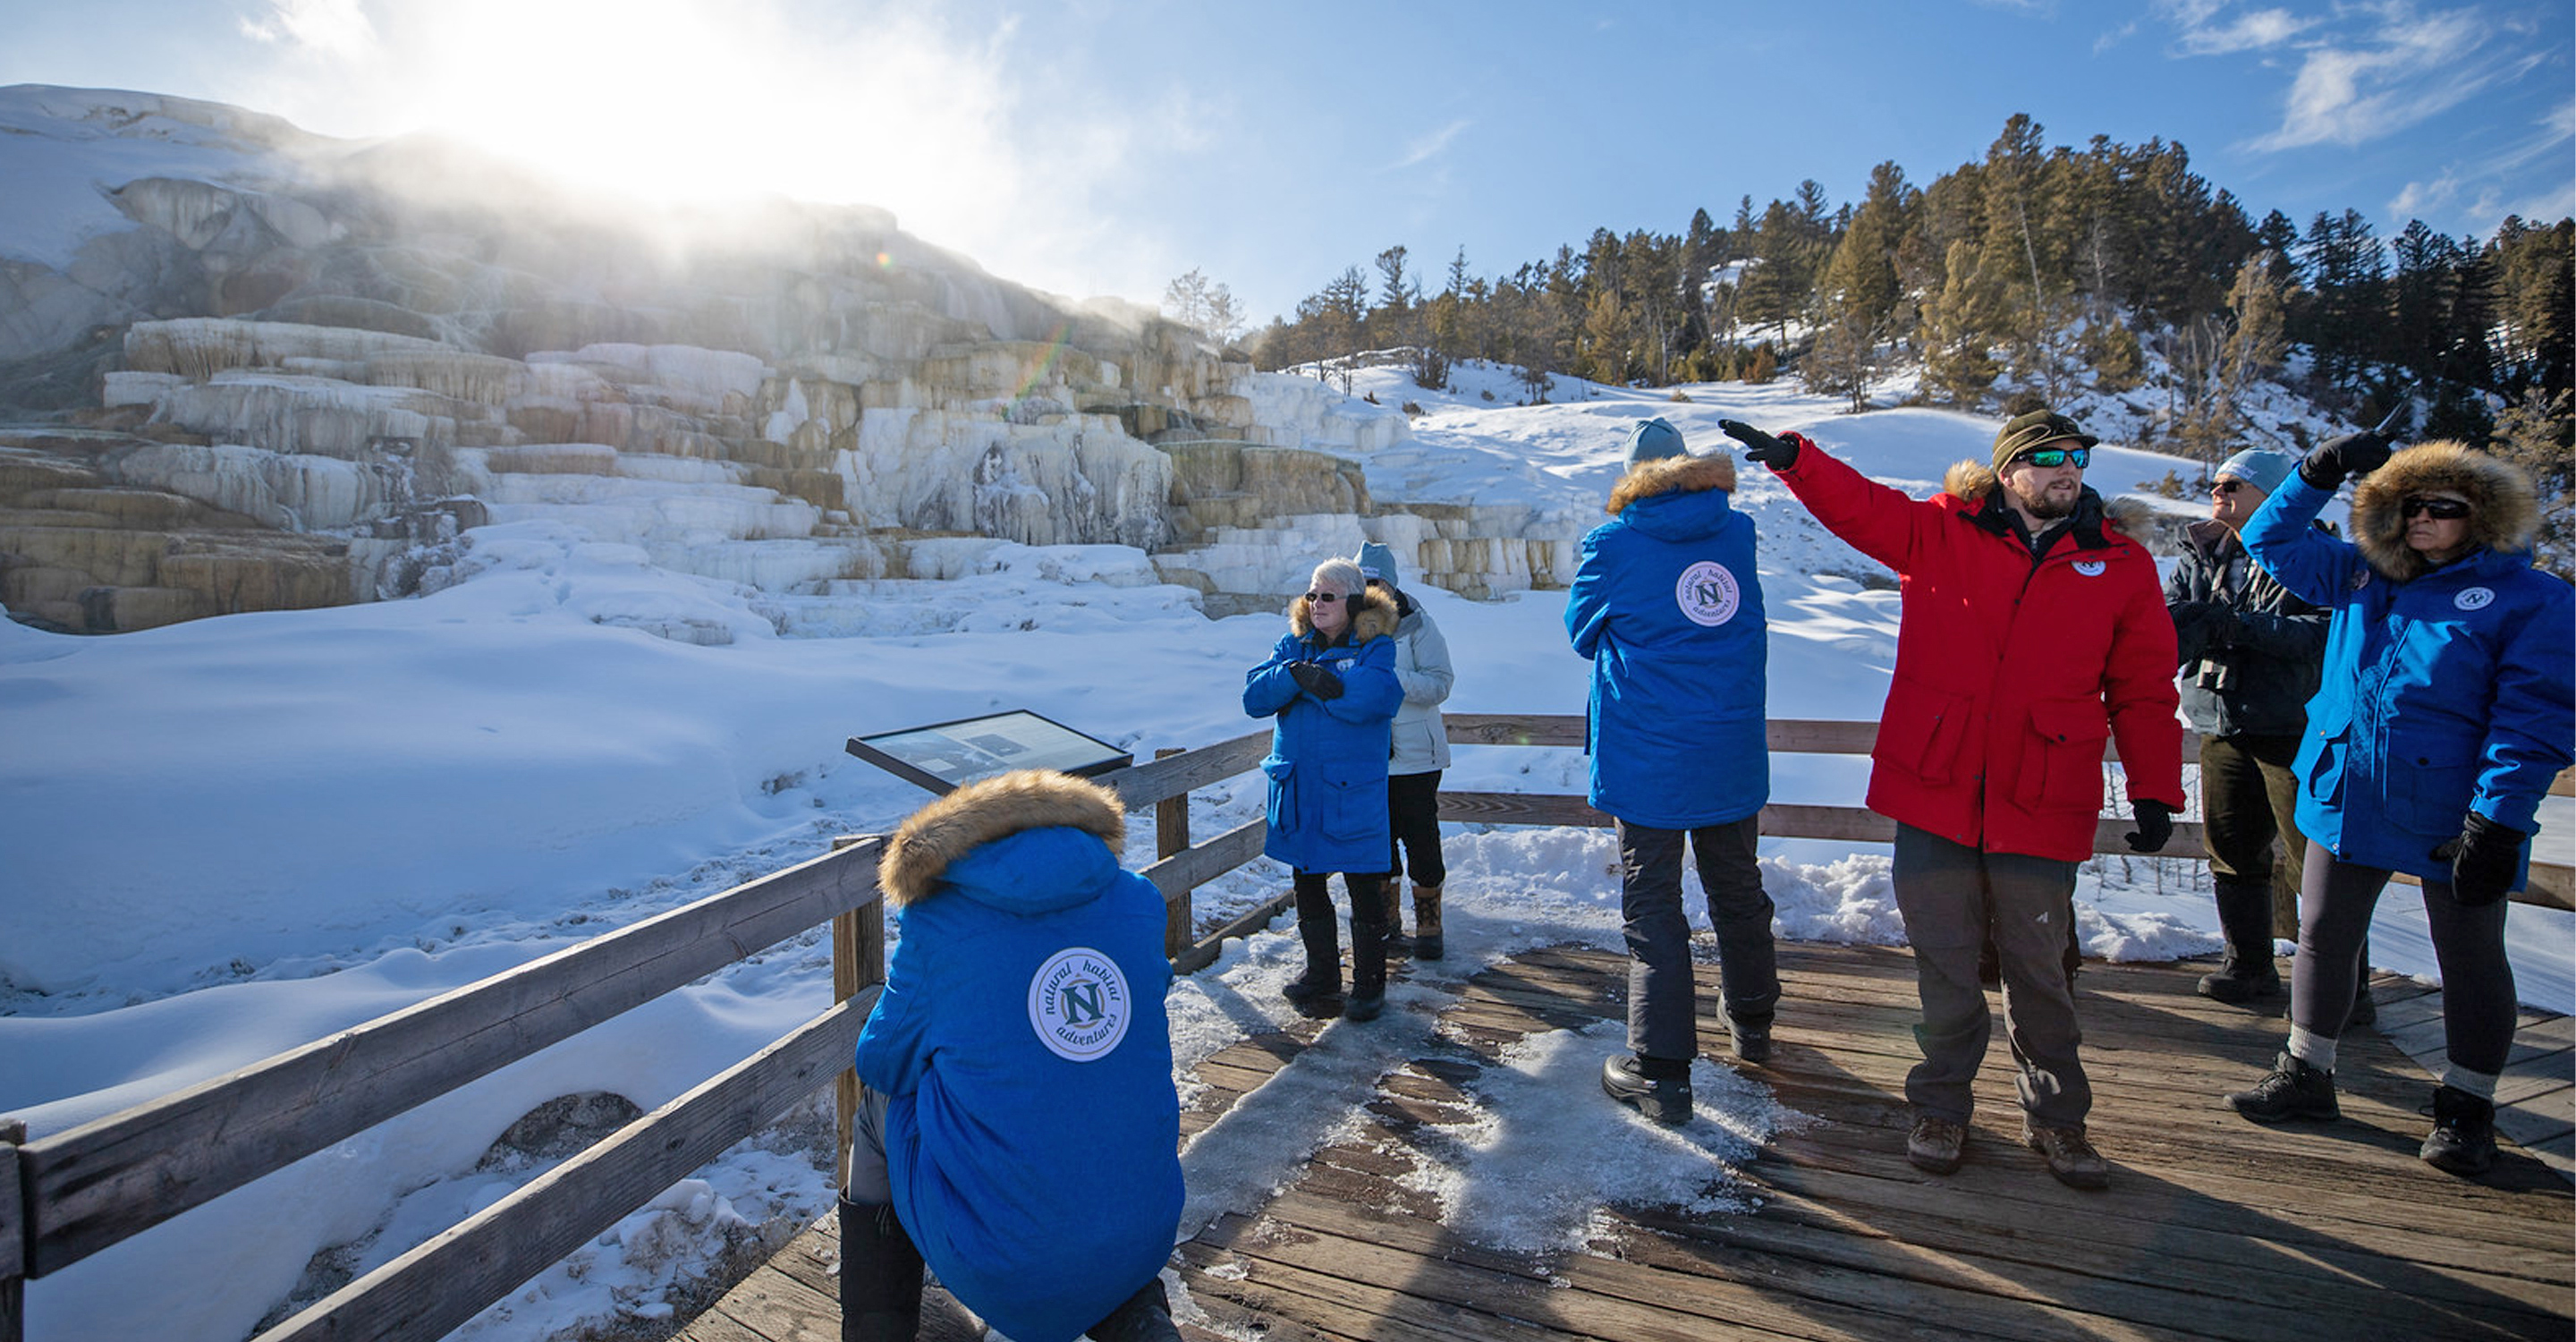 Guide speaks to travelers at Mammoth Hot Springs travertine steps in Yellowstone National Park, United States